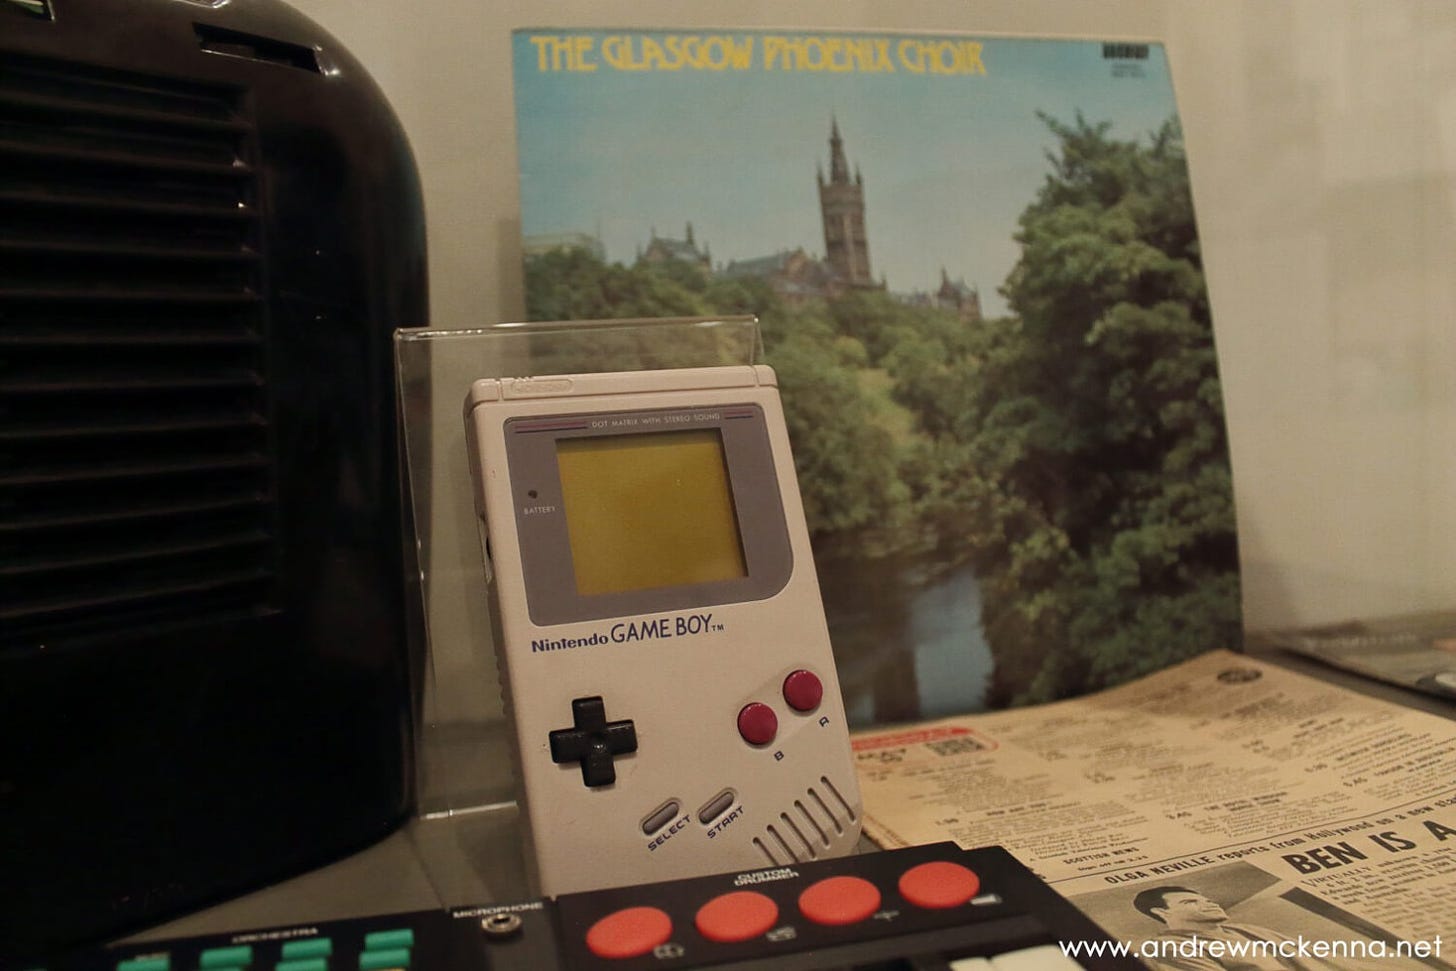 A Nintendo Gameboy and a 12 inch LP that has a cover photo of Glasgow university sprie through the trees.